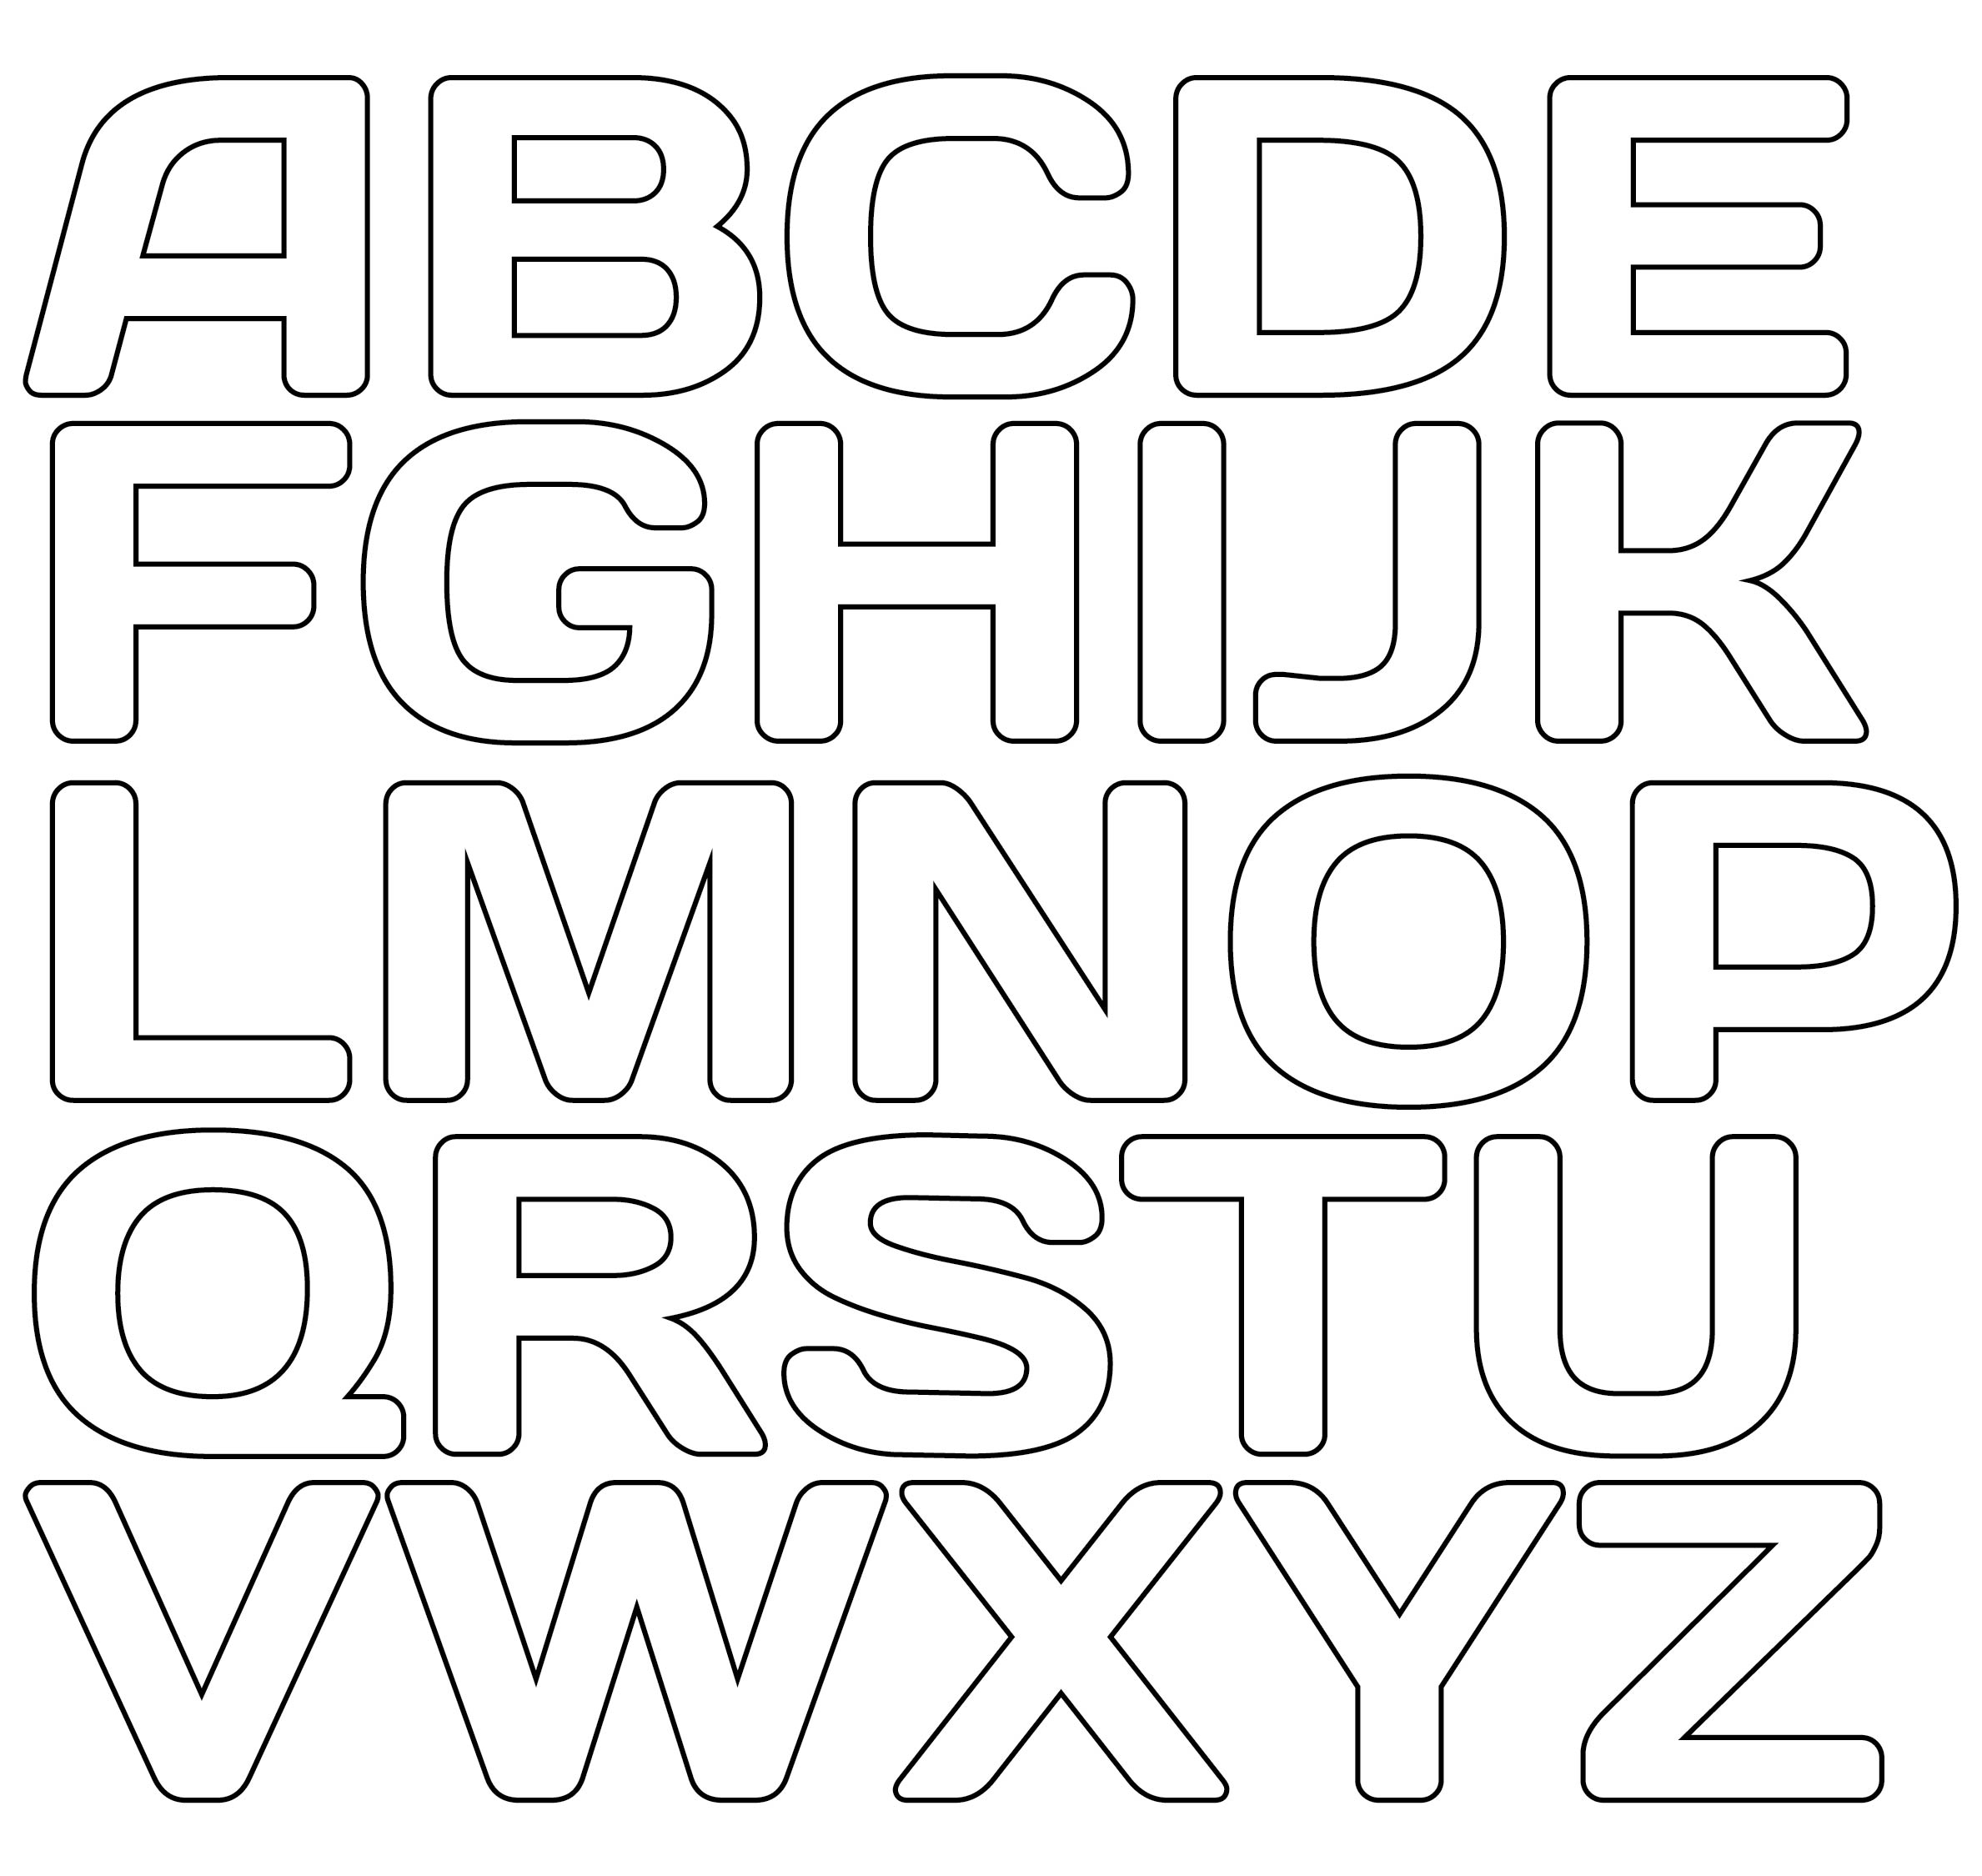 7 Best Images of Free Printable Alphabet Cut Outs Alphabet Letters to